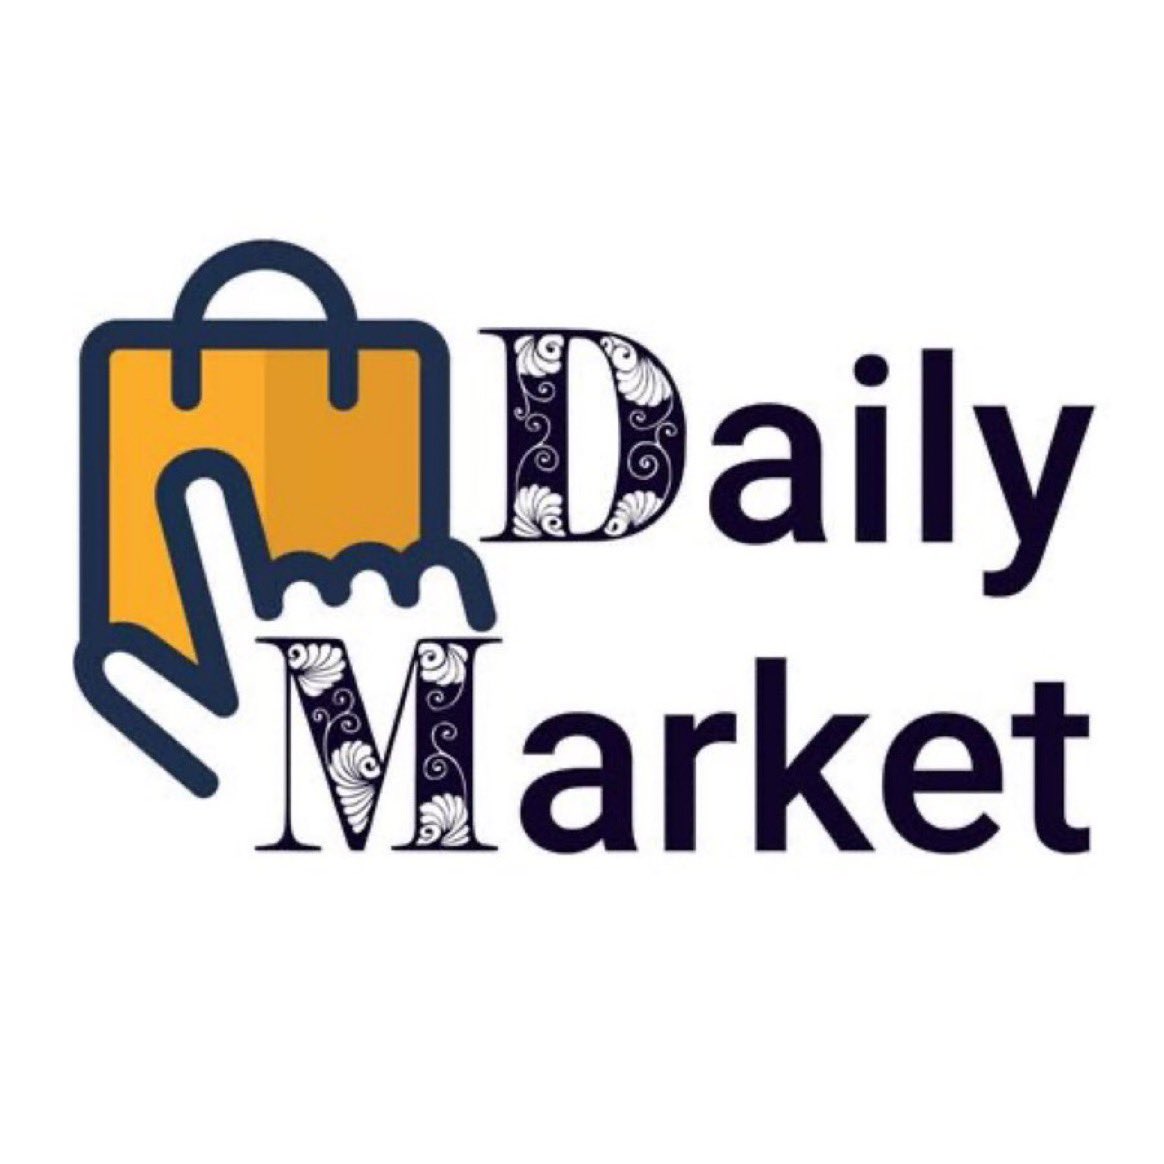 The Daily Market is now open. This is an initiative to help small businesses get visibility using my social media platforms. Advertise the goods and services that you are selling here for free. People usually respond to adverts with phone numbers and prices. Do due diligence